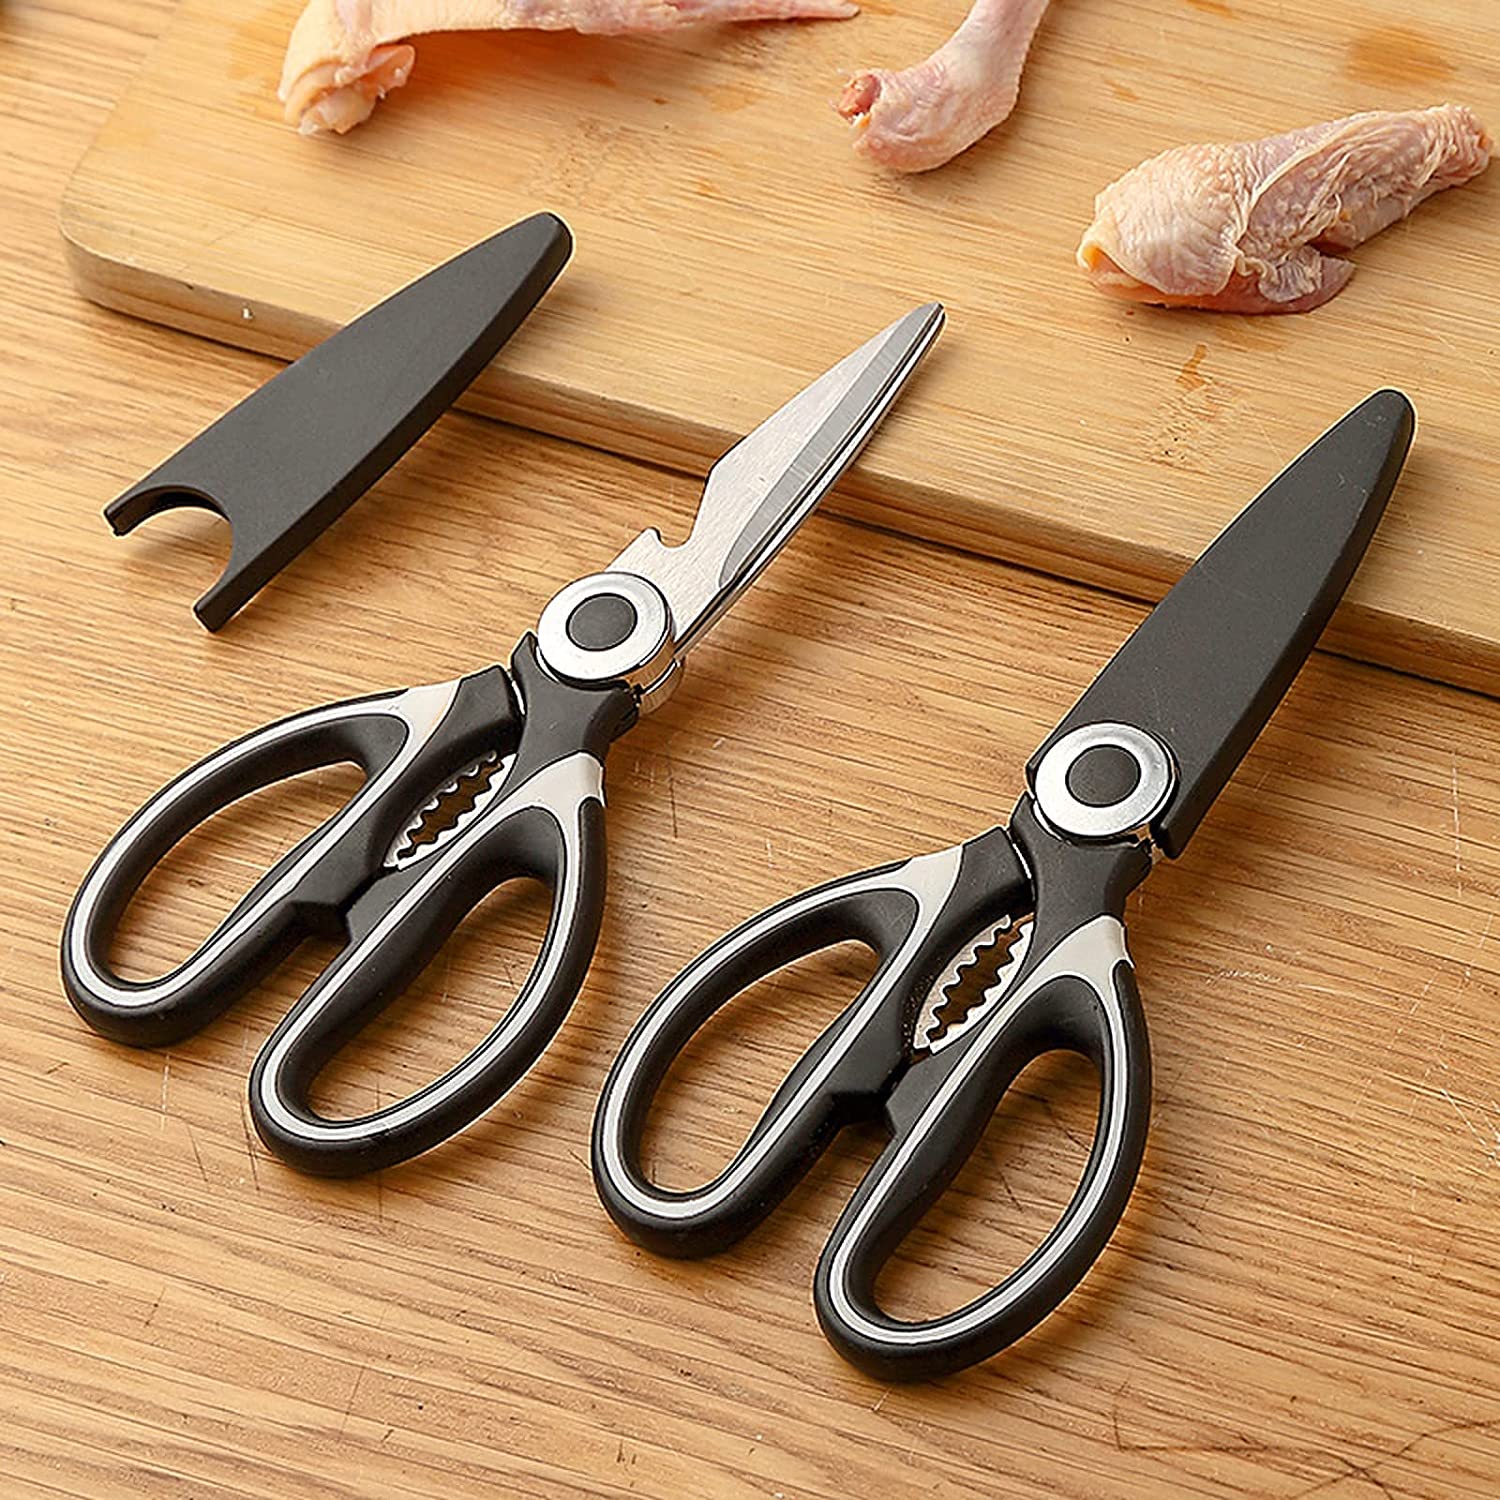 Quality Kitchen Scissors Best For Cutting Leaves, Chicken and Meat